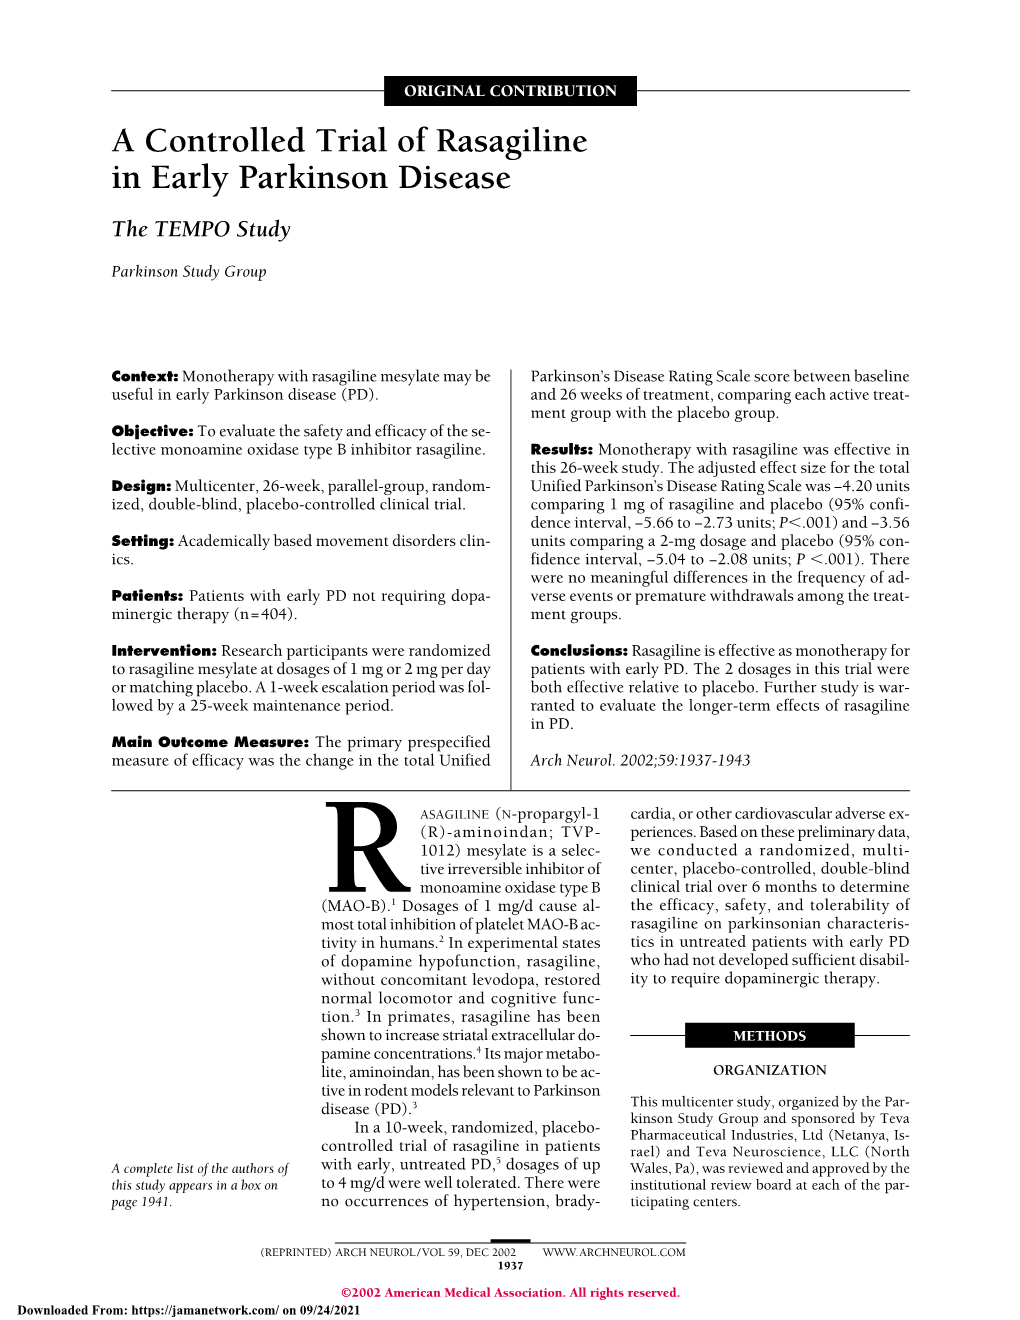 A Controlled Trial of Rasagiline in Early Parkinson Disease the TEMPO Study